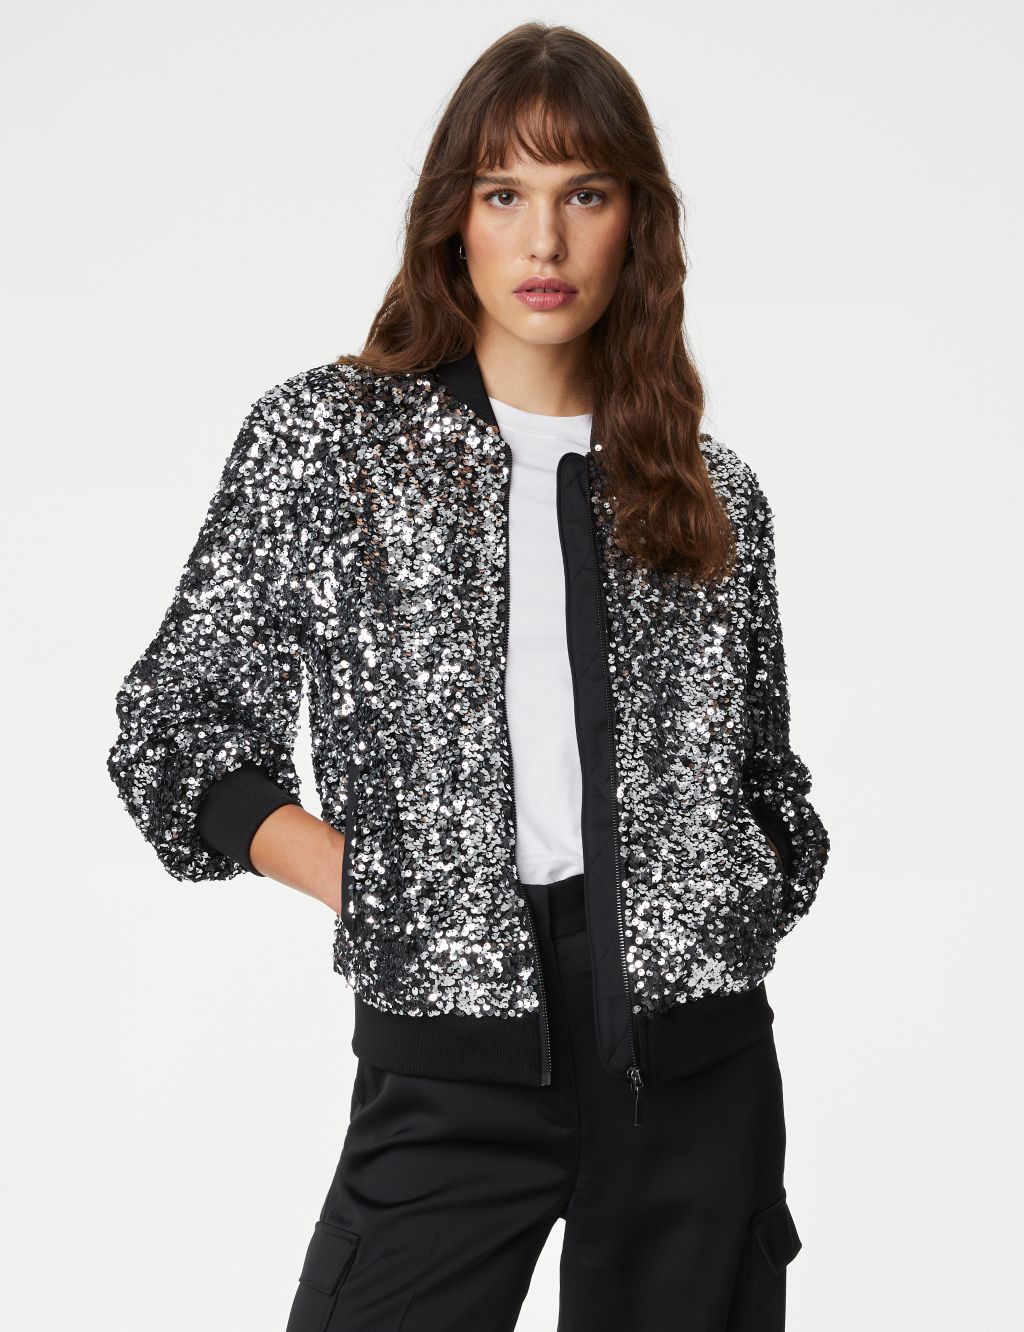 Sequin Relaxed Bomber Jacket image 4